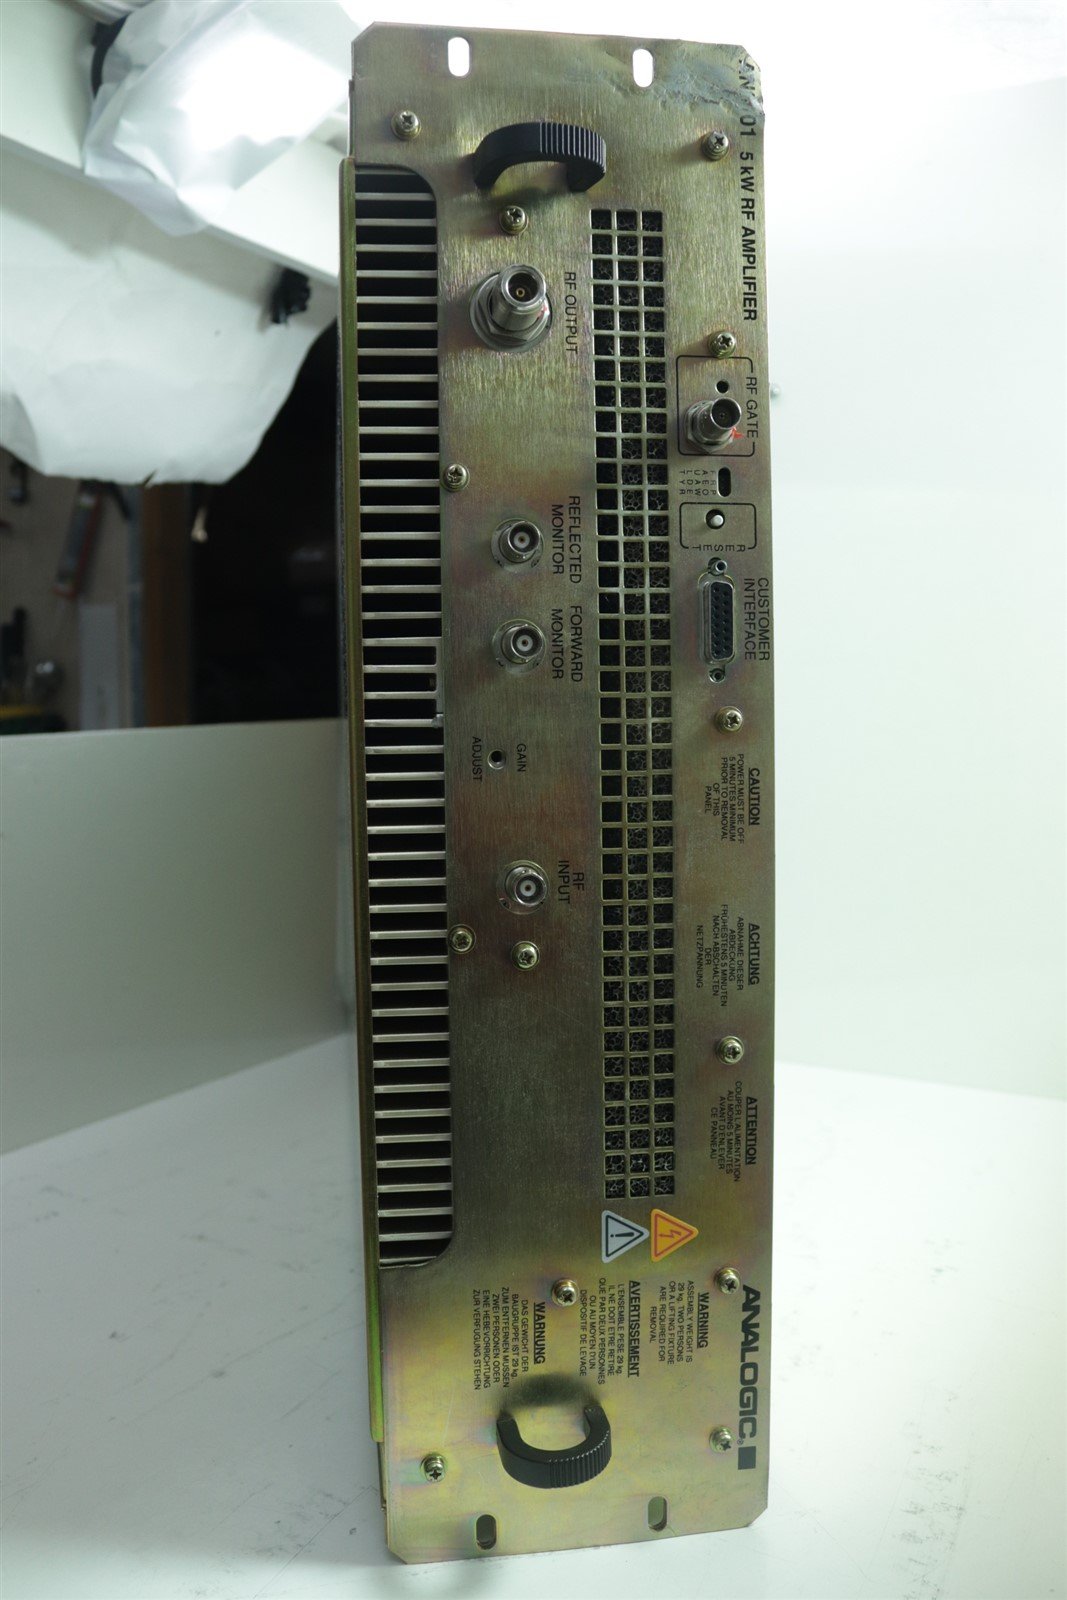 ANALOGIC AN8101-08 MRI RF Power Amplifier 5kW 6.5-43MHz philips Panorama TESTED